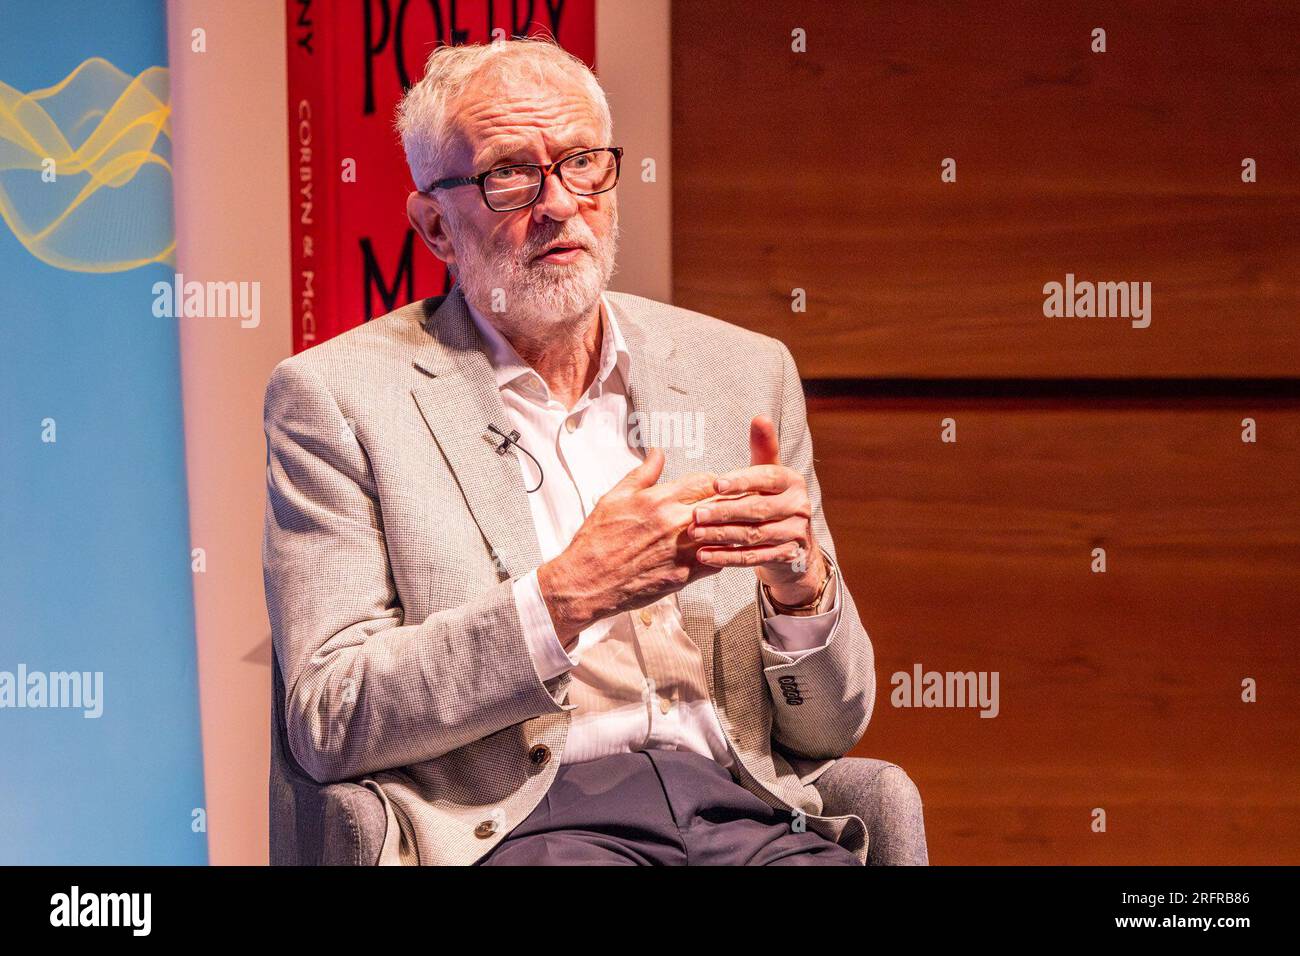 Edinburgh, United Kingdom. 05 August, 2023 Pictured: Jeremy Corbyn. Former Labour leader Jeremy Corbyn MP and renowned trade unionist Len McCluskey are interviewed by LBC presenter Iain Dale at the Edinburgh Fringe. During the interview McCluskey accused Keir Starmer of reneging on an agreement to retain Corbyn in the Labour Party. Jeremy Corbyn was quizzed if he will stand as an independent candidate in his constituency and responded by saying ‘watch this space’. Credit: Rich Dyson/Alamy Live News Stock Photo